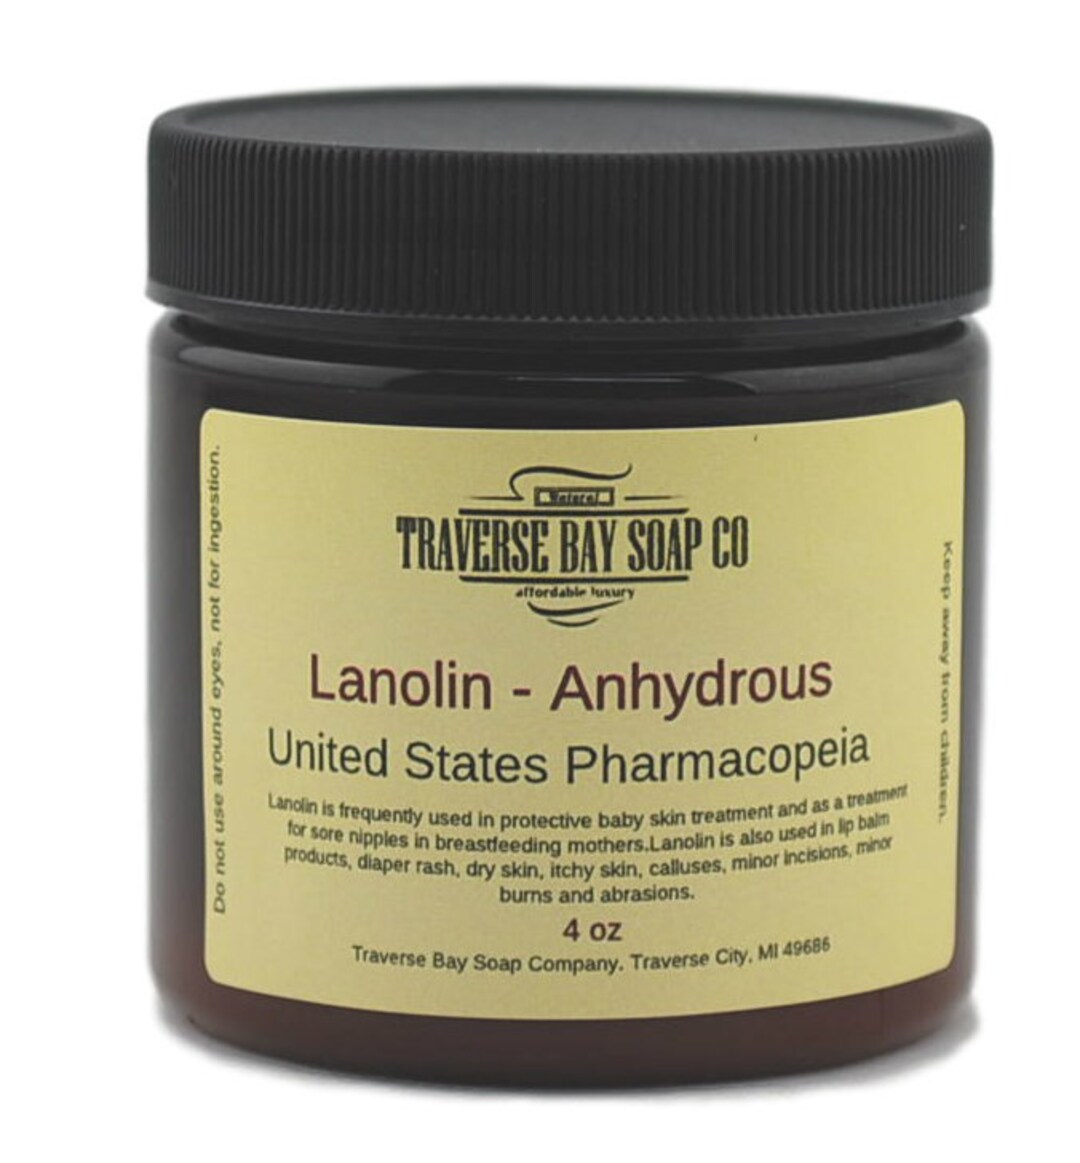 Traverse Bay Bath And Body-Lanolin - Anhydrous - USP, 16 oz, Safety Sealed  Container. Soap Making, Lotion, Creams, Bath, Beauty.